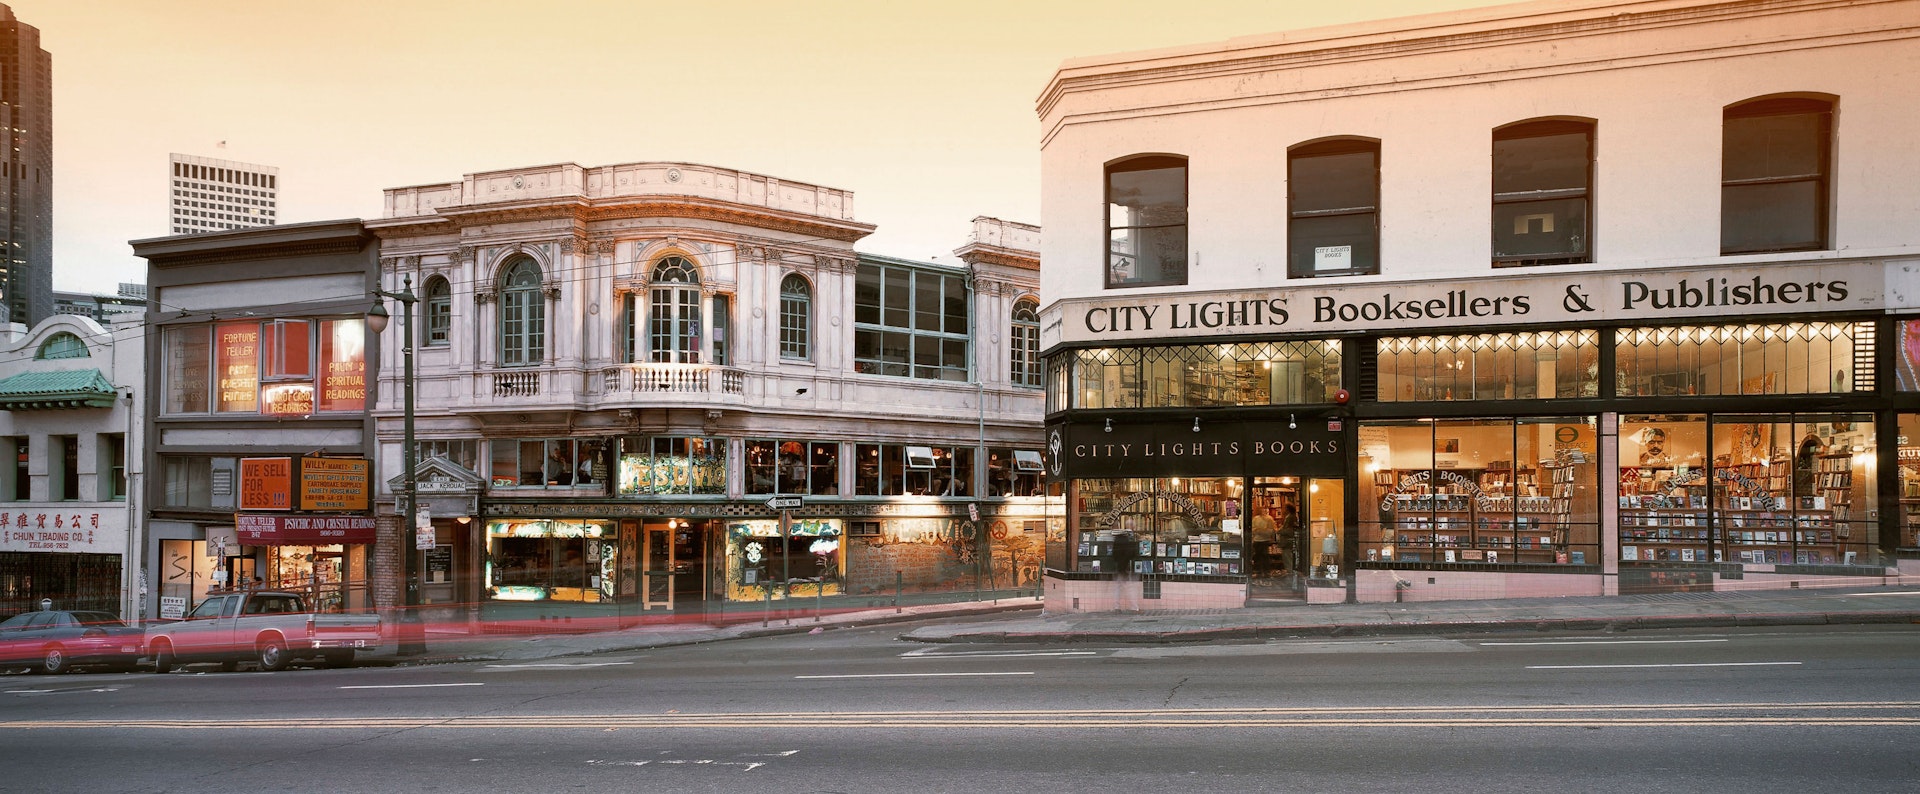 USA CA San Francisco City Lights bookstore. Image shot 2014. Exact date unknown.